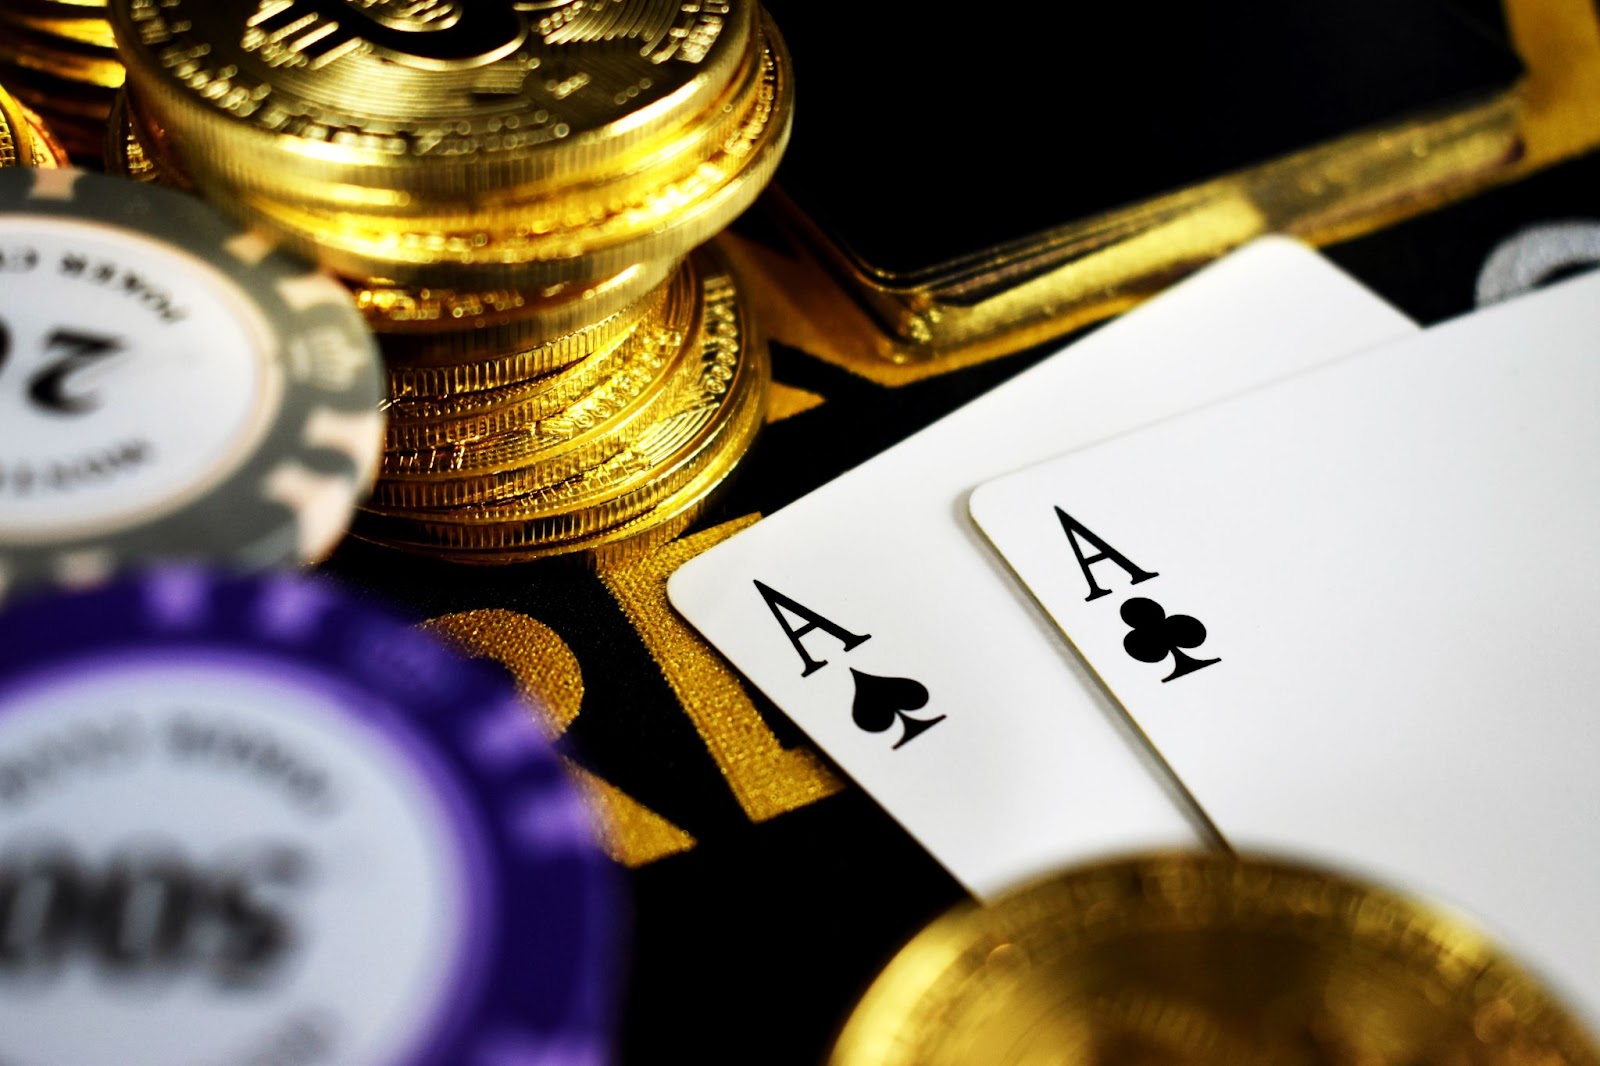 cryptocurrency casino - What To Do When Rejected